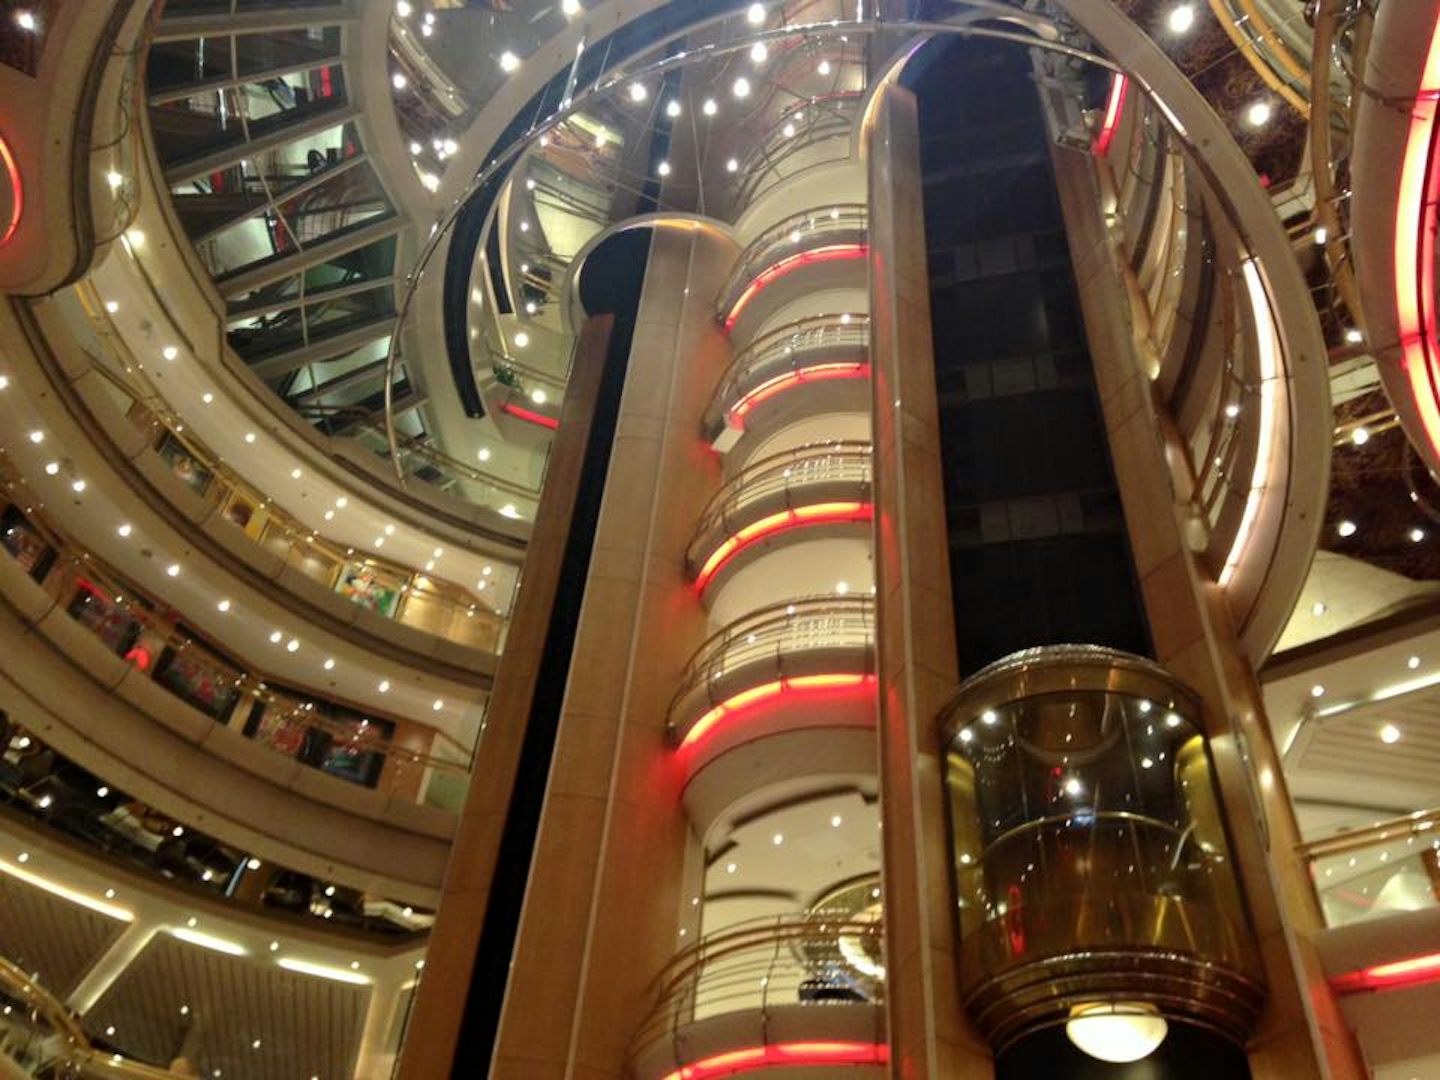 Centrum, looking up from Deck 4. Great, endless entertainment here at night